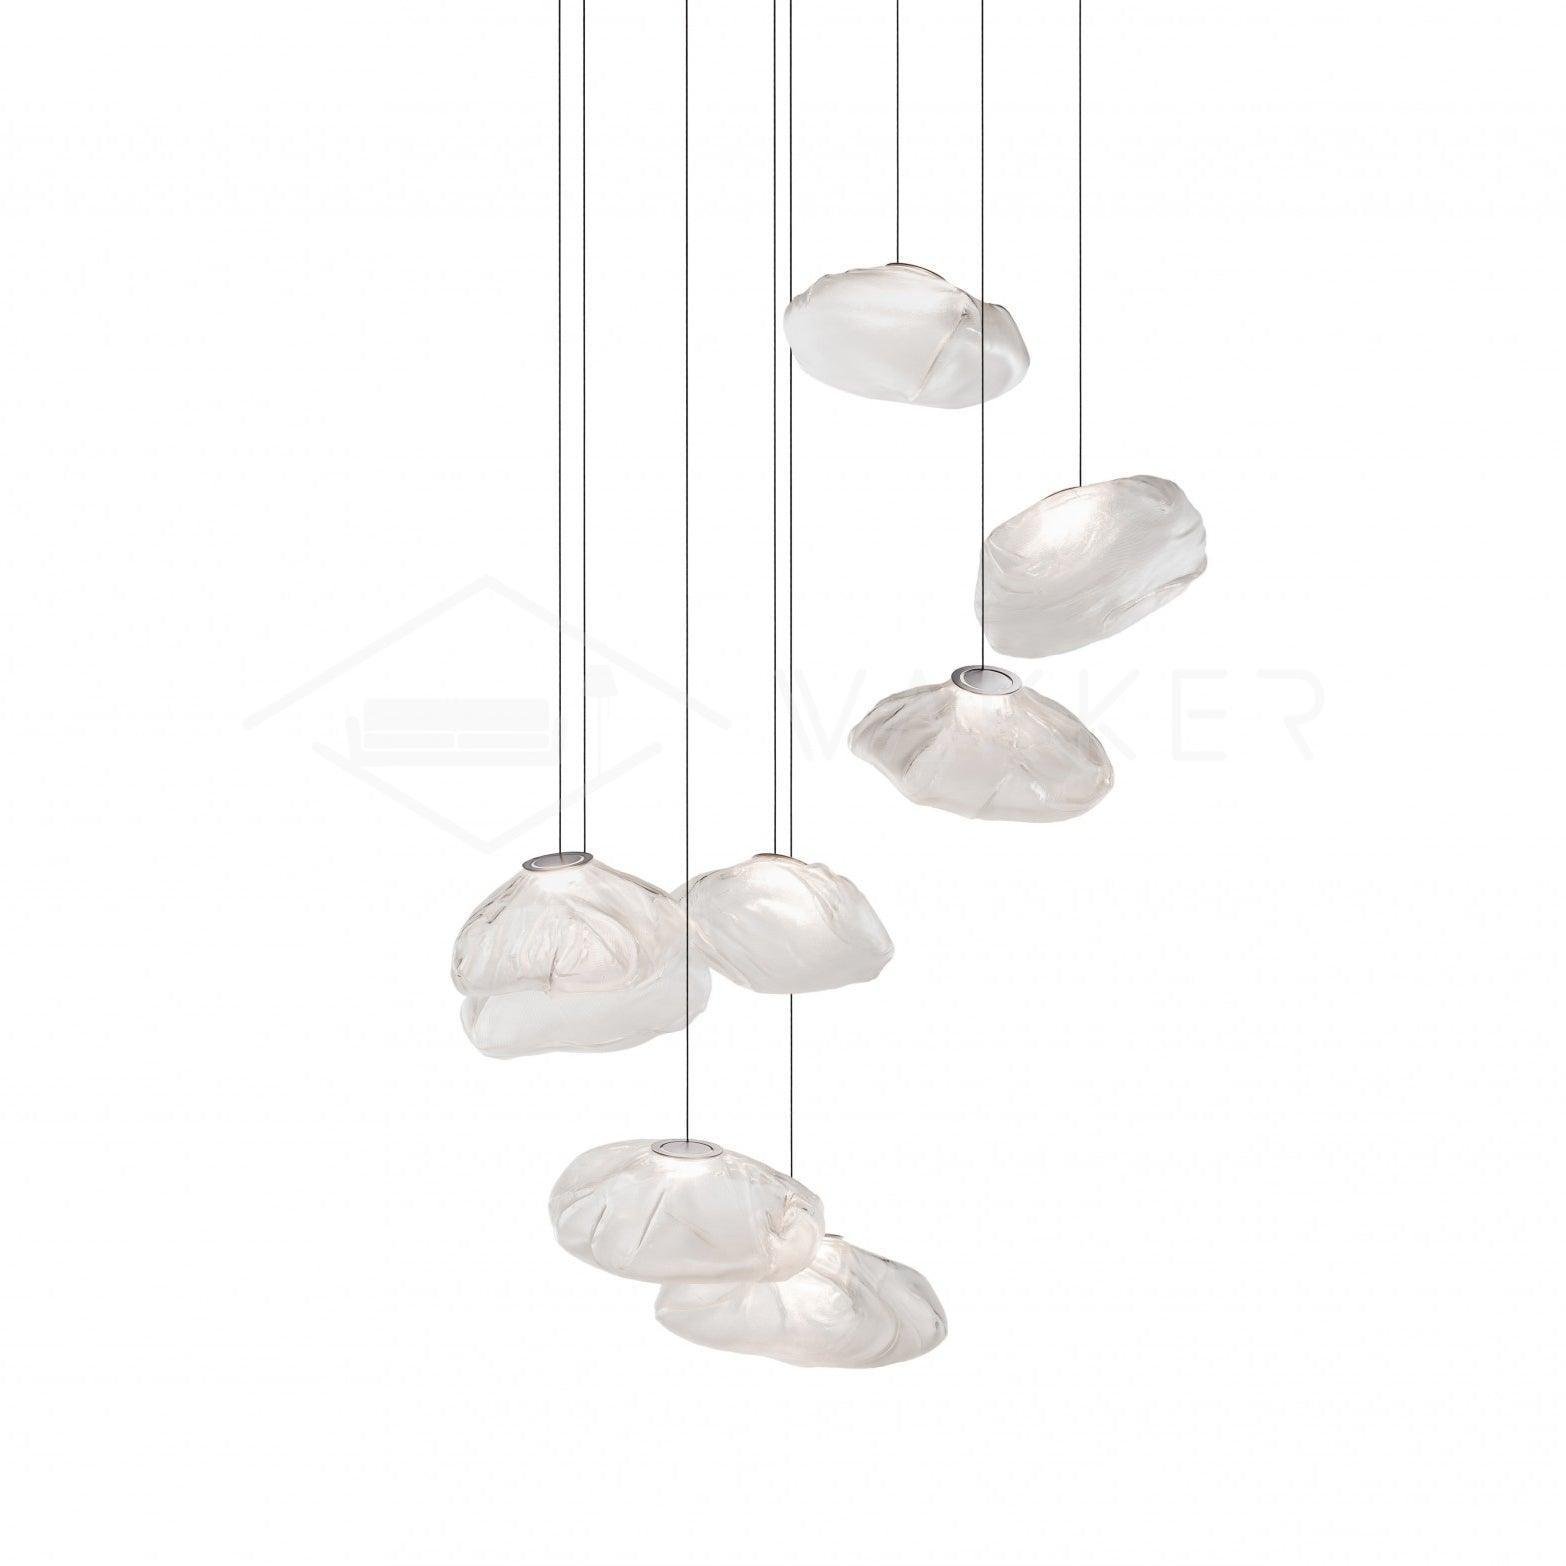 Pendant Light with 8 Heads, 73 Diameter, 20cm Rectangle Canopy, and Clear Glass.